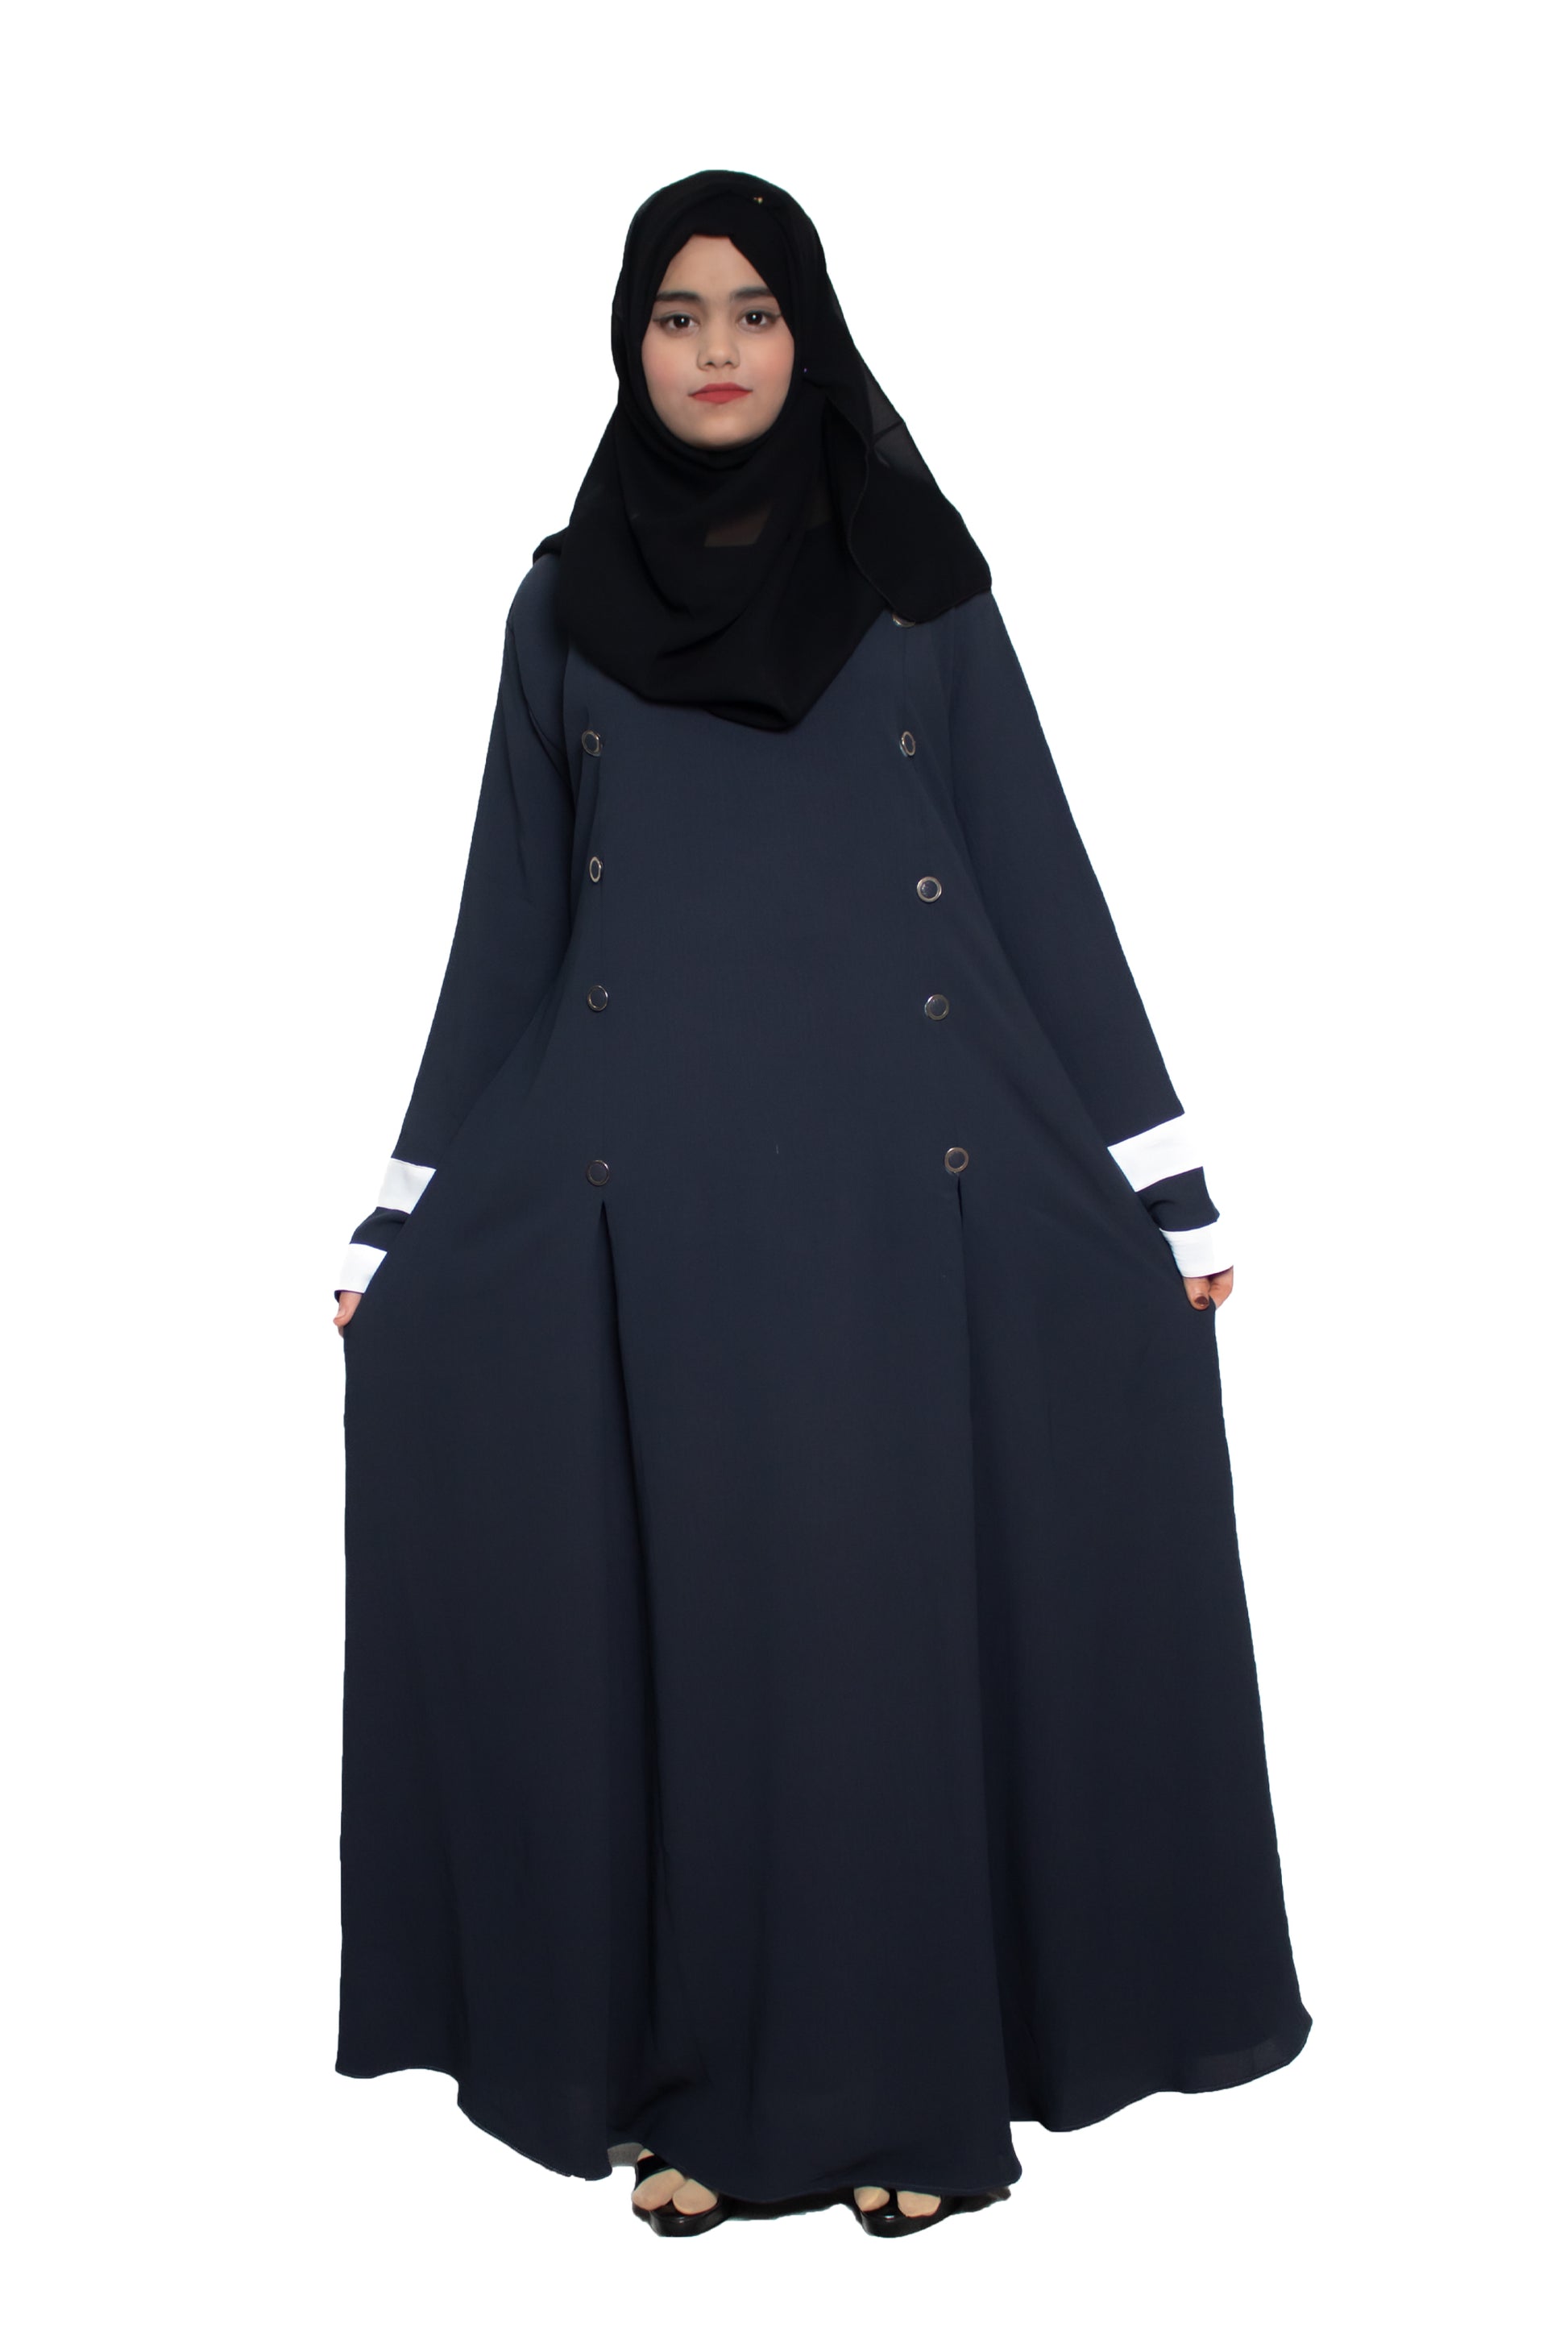 Modest City Self Design Plain Dark Grey Front Button with Beige Cuff Abaya or Burqa With Hijab for Women & Girls-Series Laiba